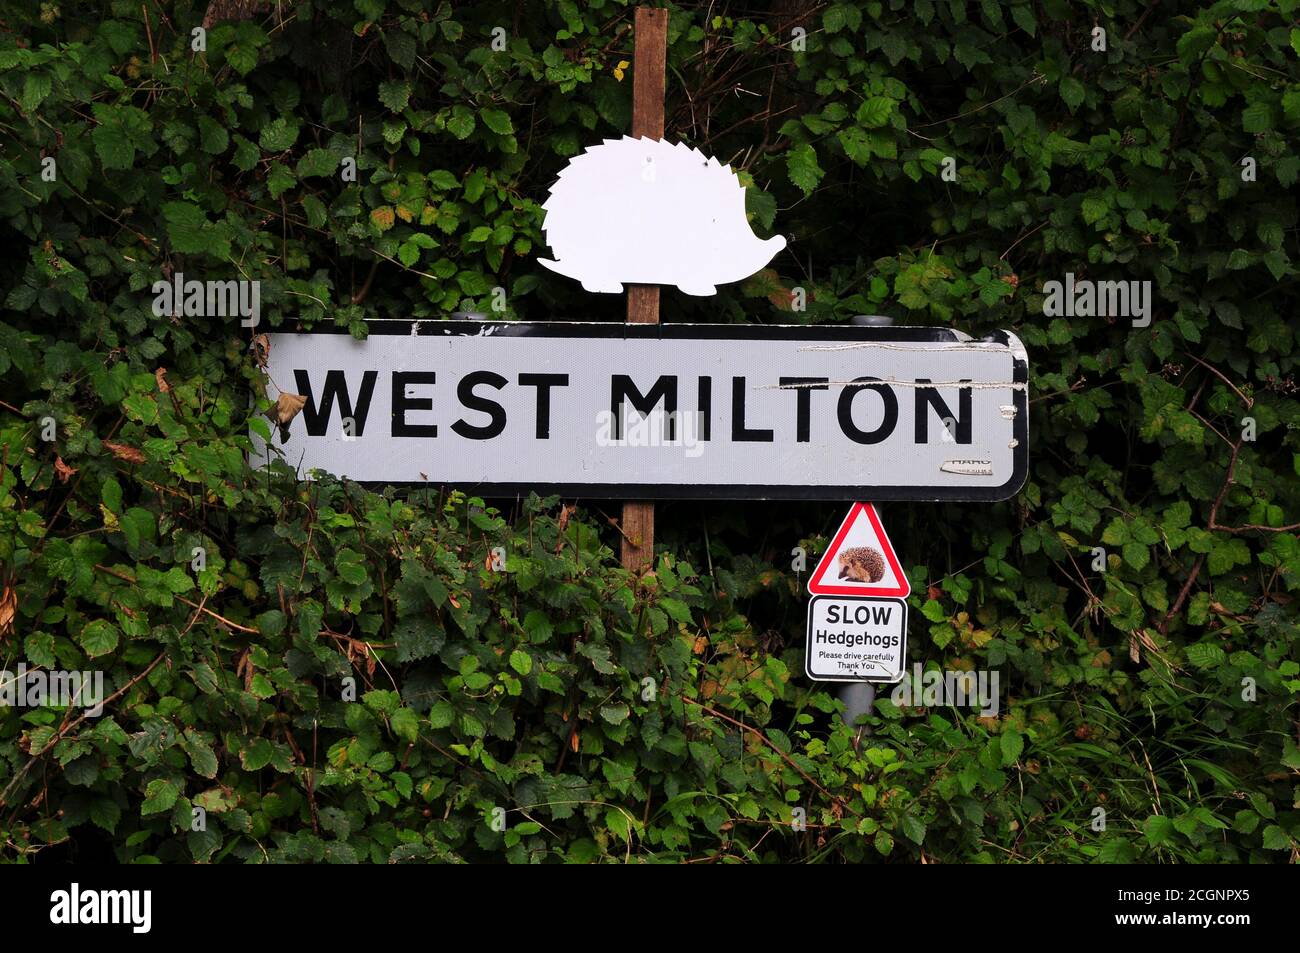 Hedgehog warning signs for motorists in West Milton, Dorset, England Stock Photo